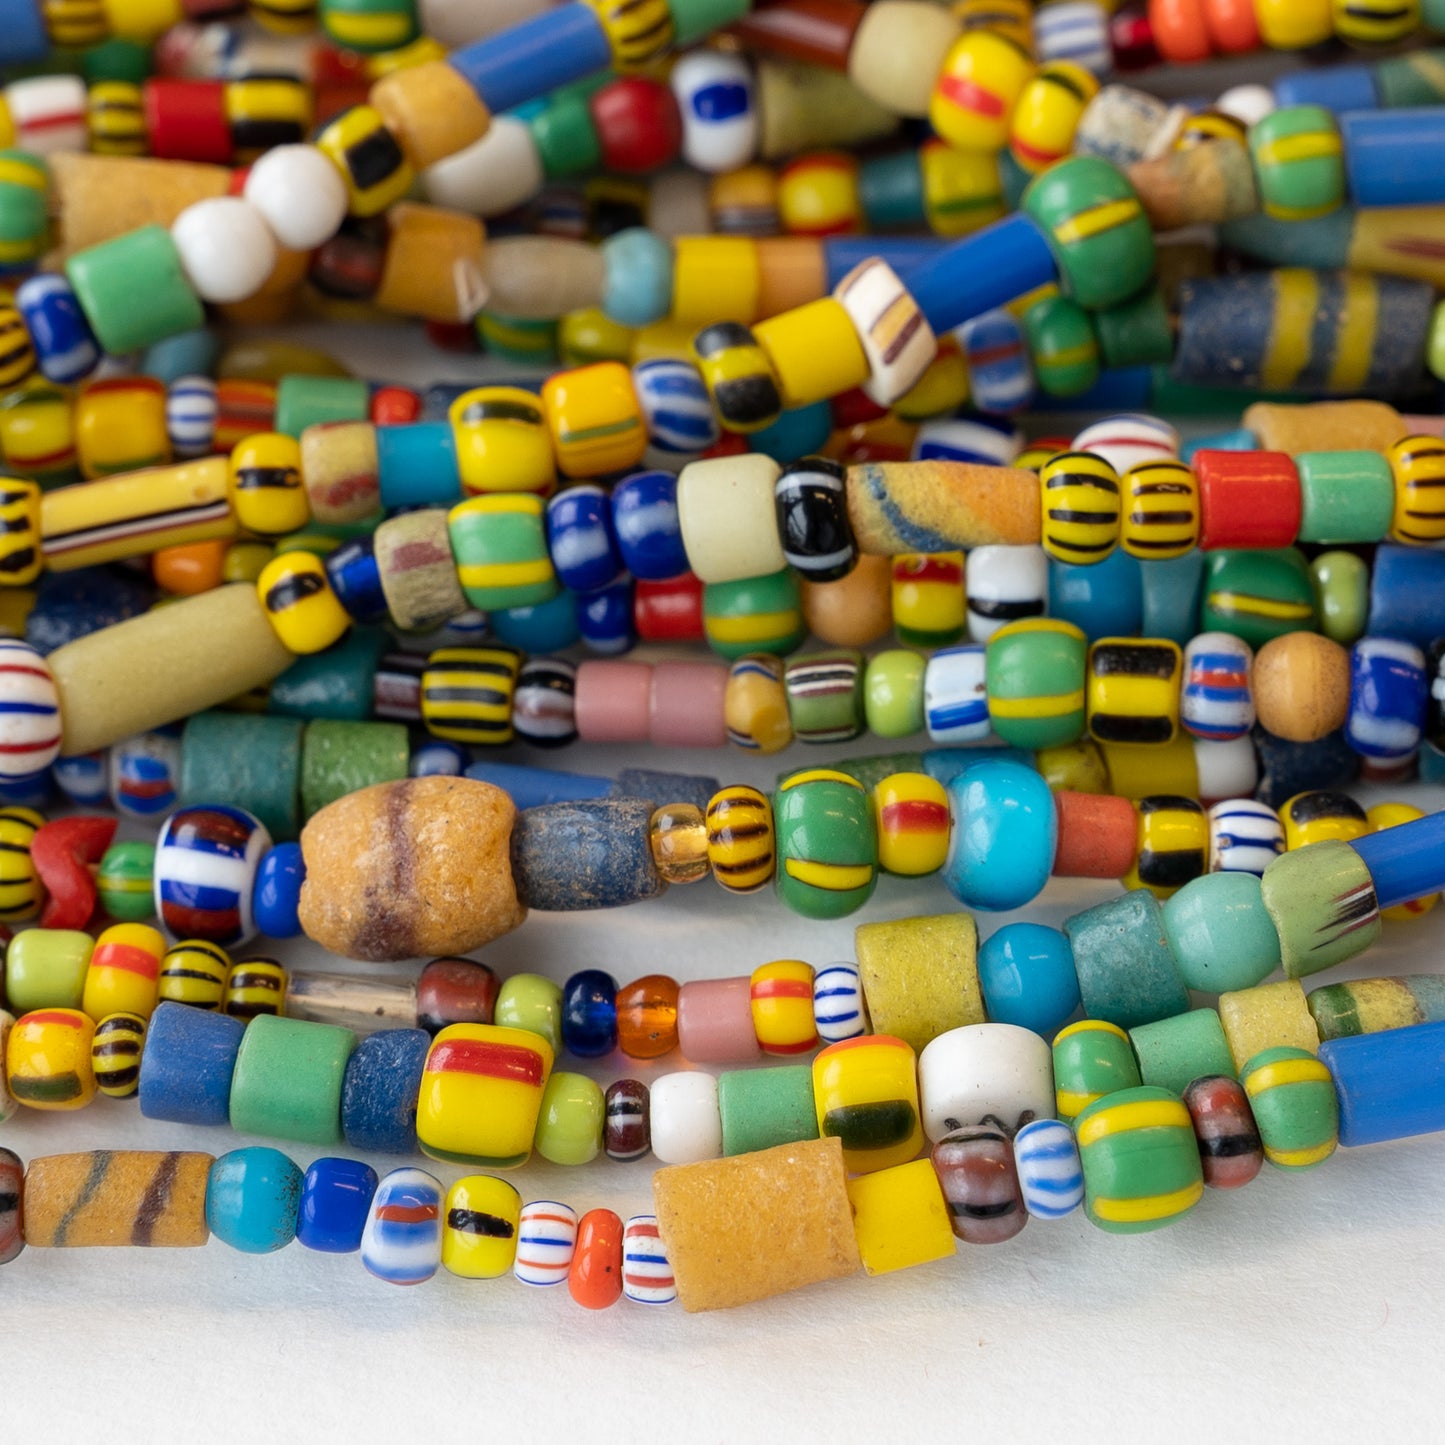 African Sand Bead Mix - Mixed Sizes and Colors and Stripes ~4-9mm - 18 Inch Strand